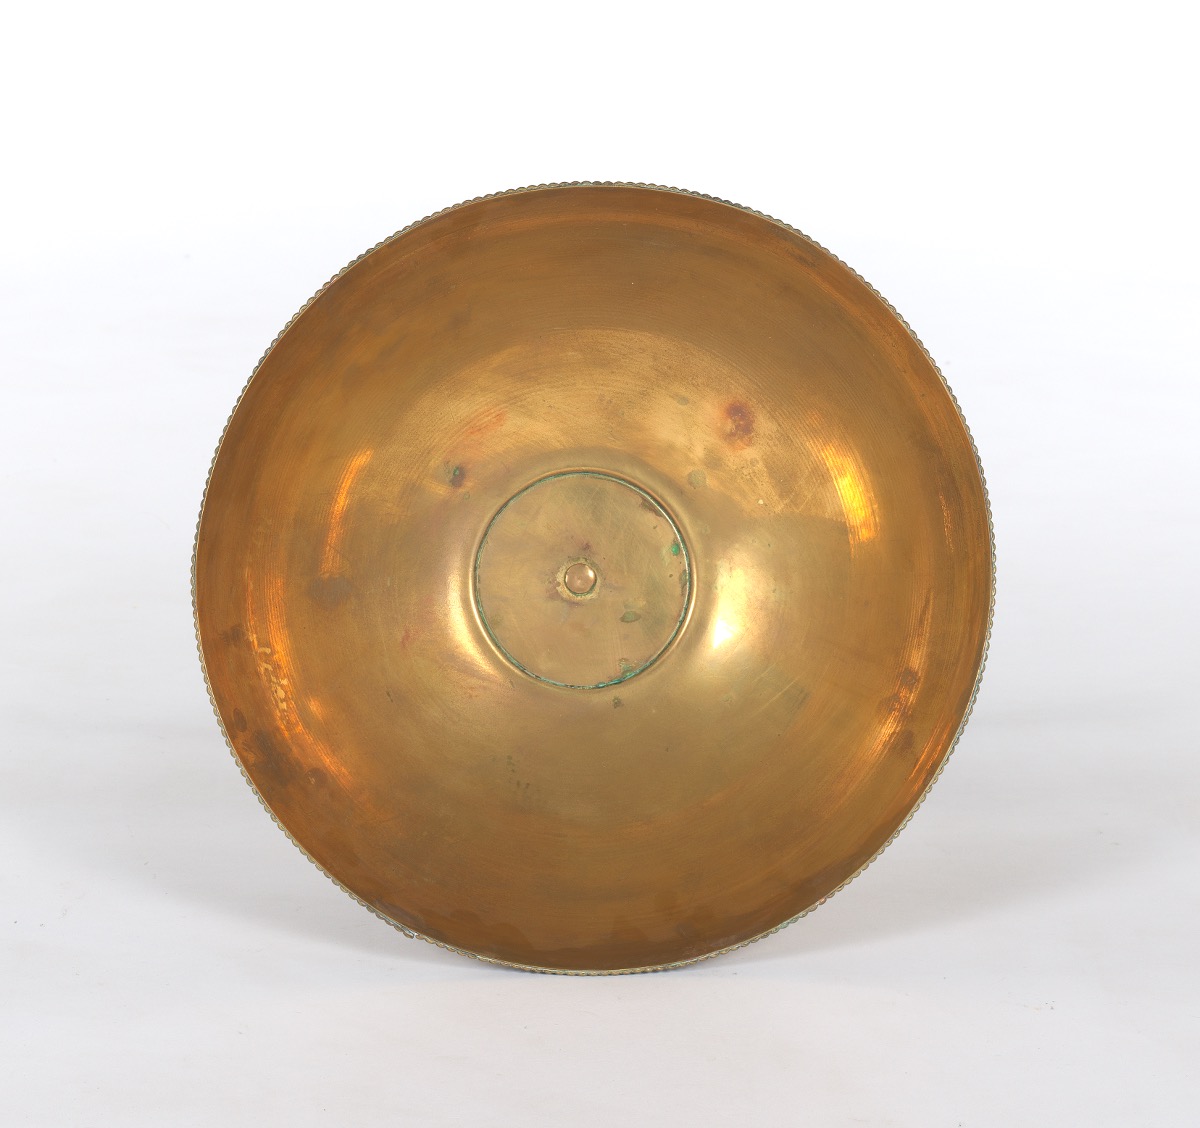 French Patinated Brass and Black Slate Centerpiece Bowl, ca. 19th Century - Image 6 of 7